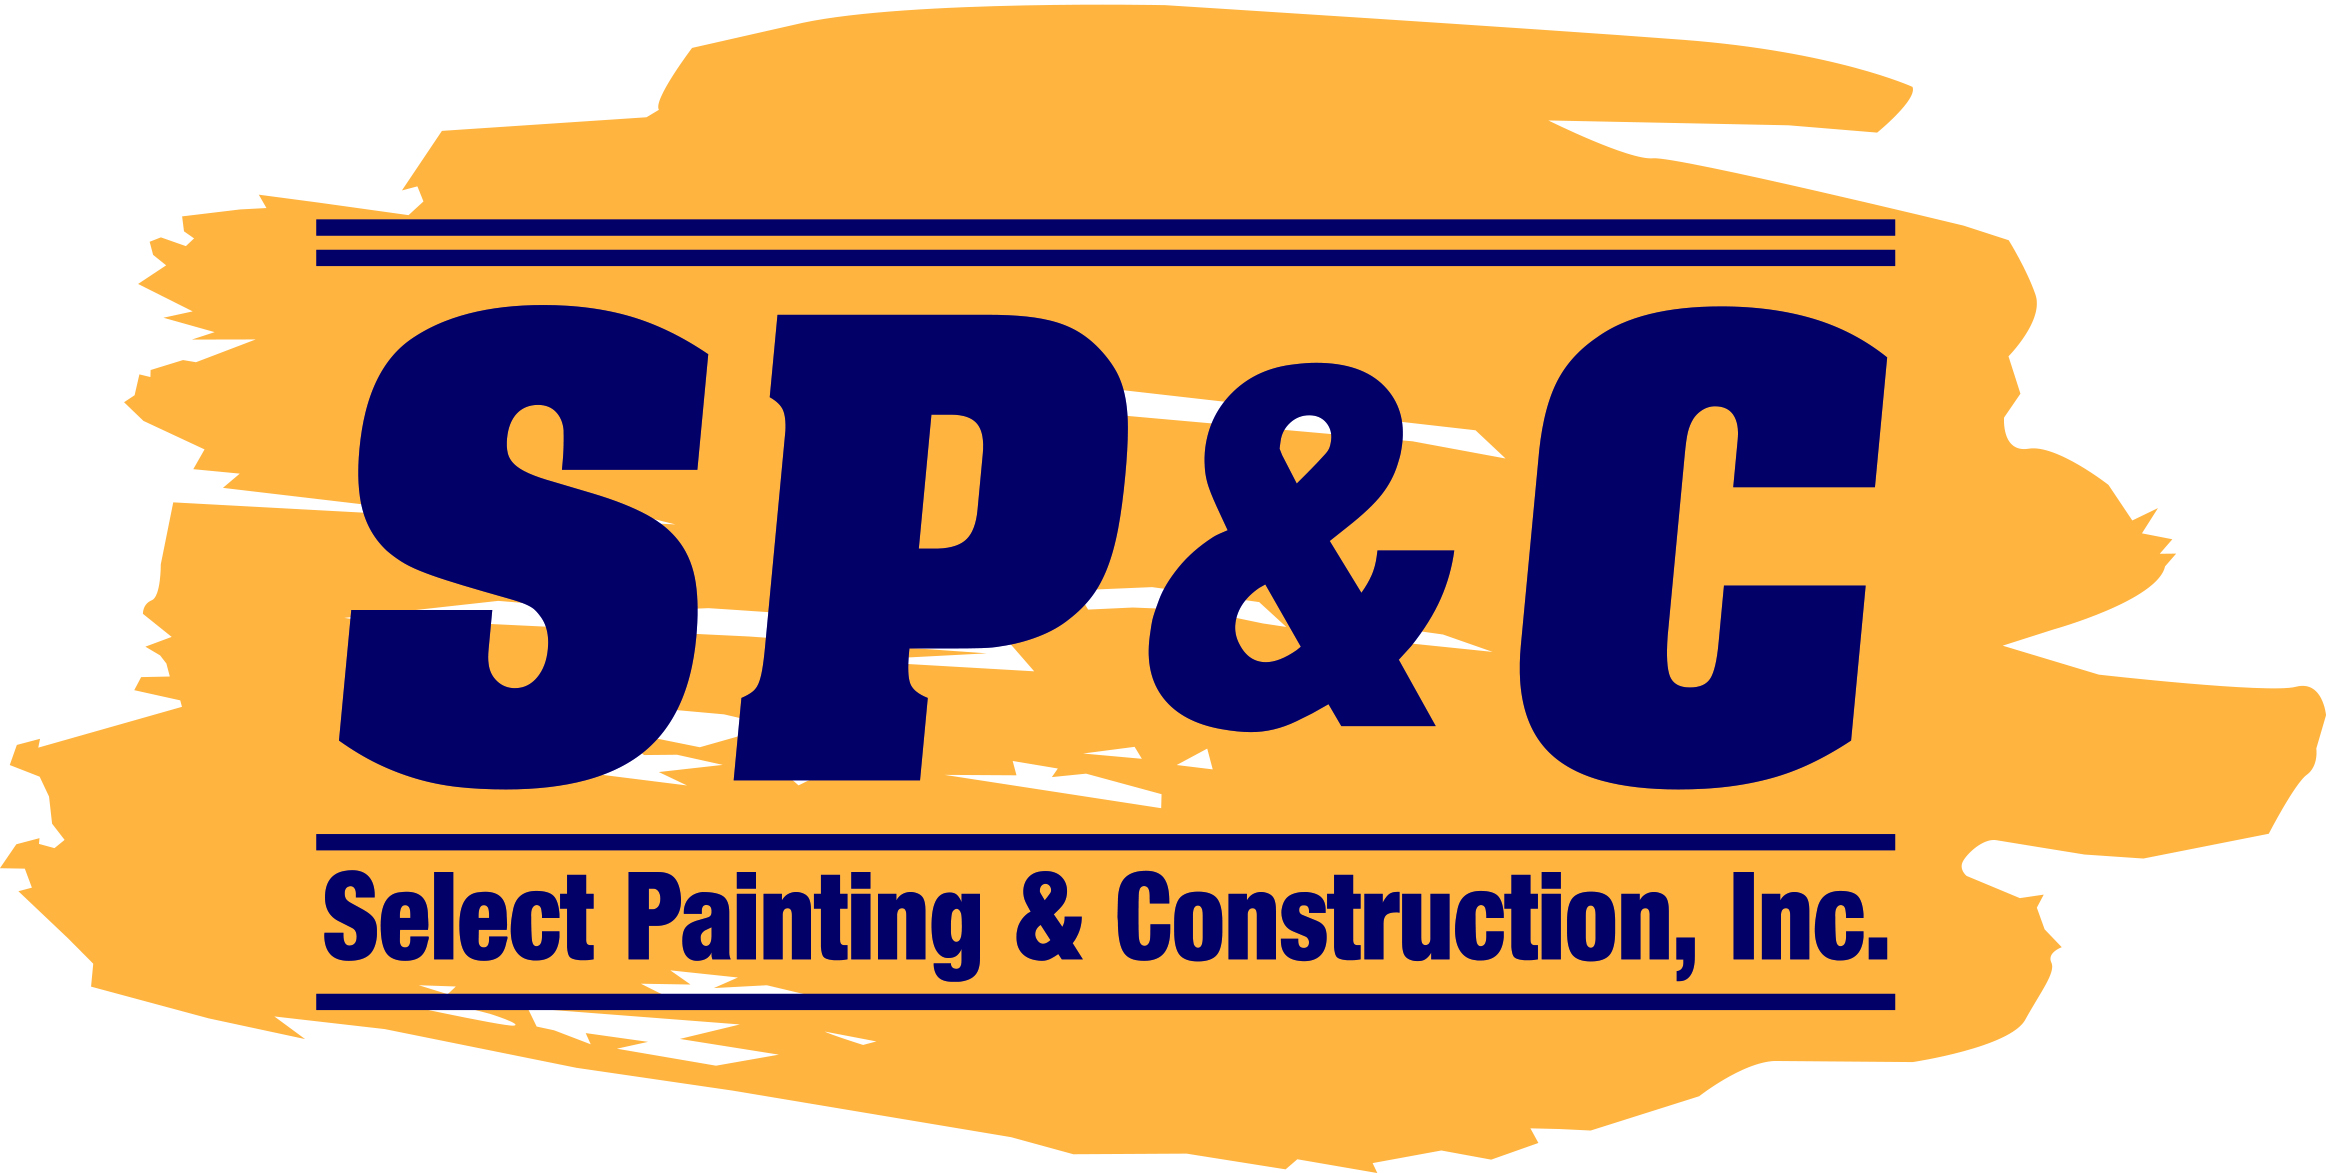 Select Painting & Construction, Inc.